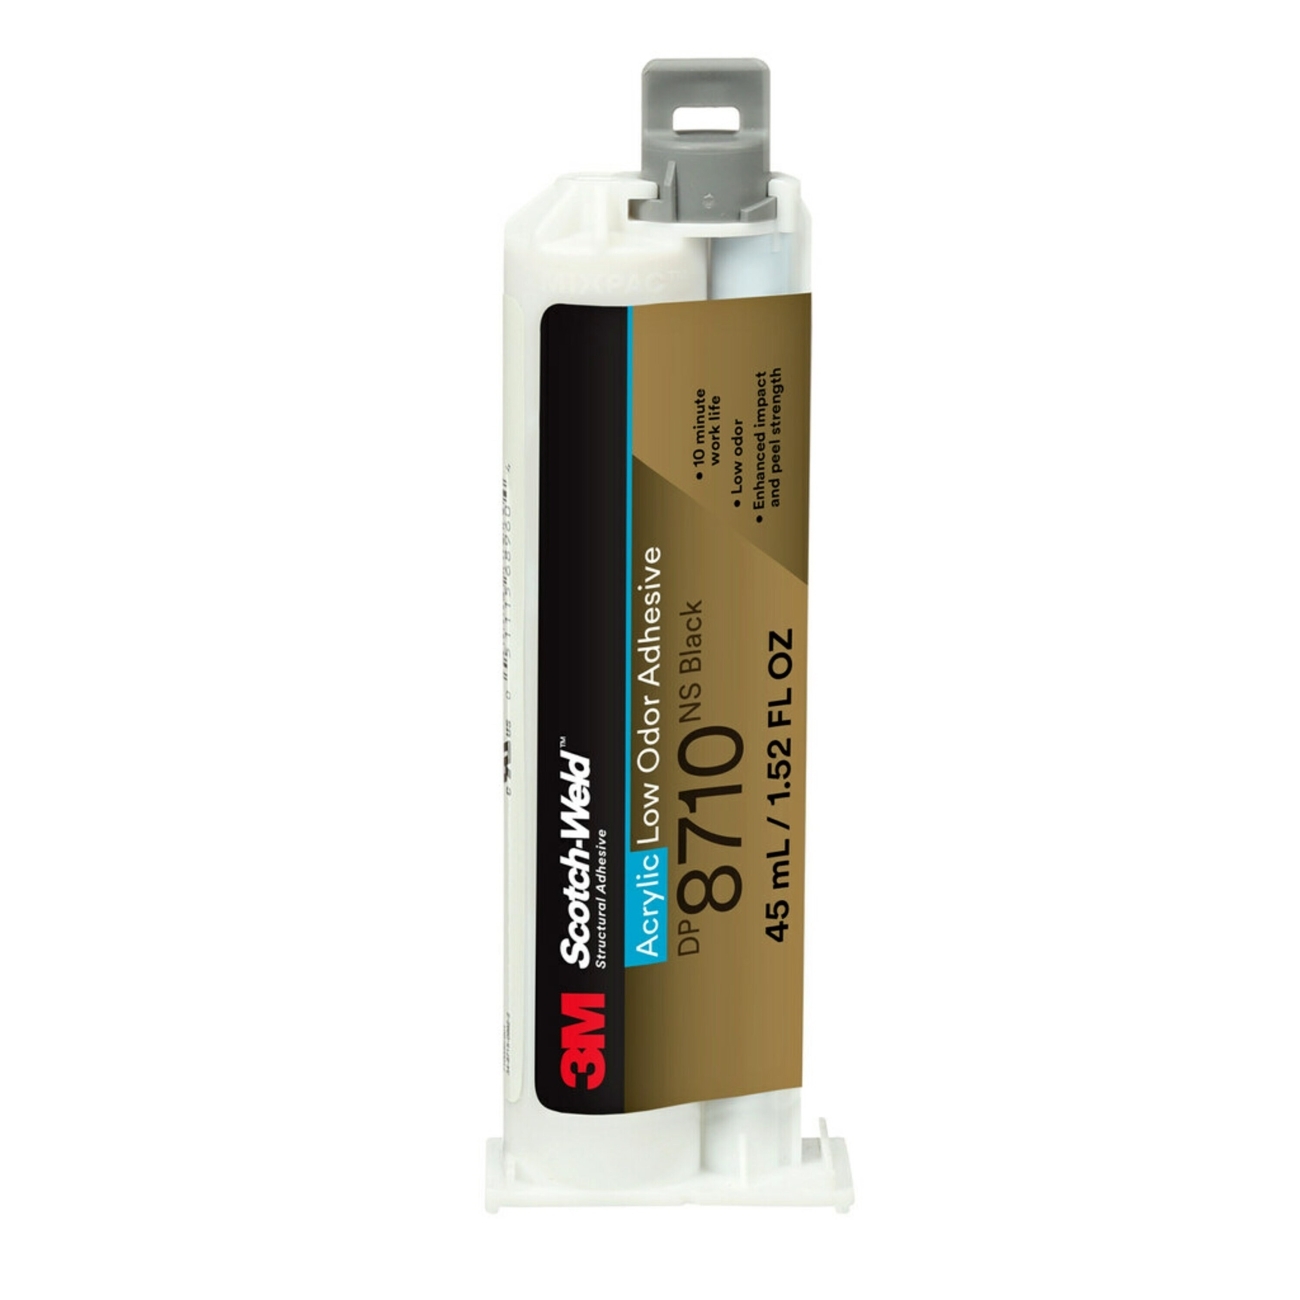 3M Scotch-Weld 2-component acrylate-based construction adhesive for the EPX System DP 8710 NS, black, 45 ml